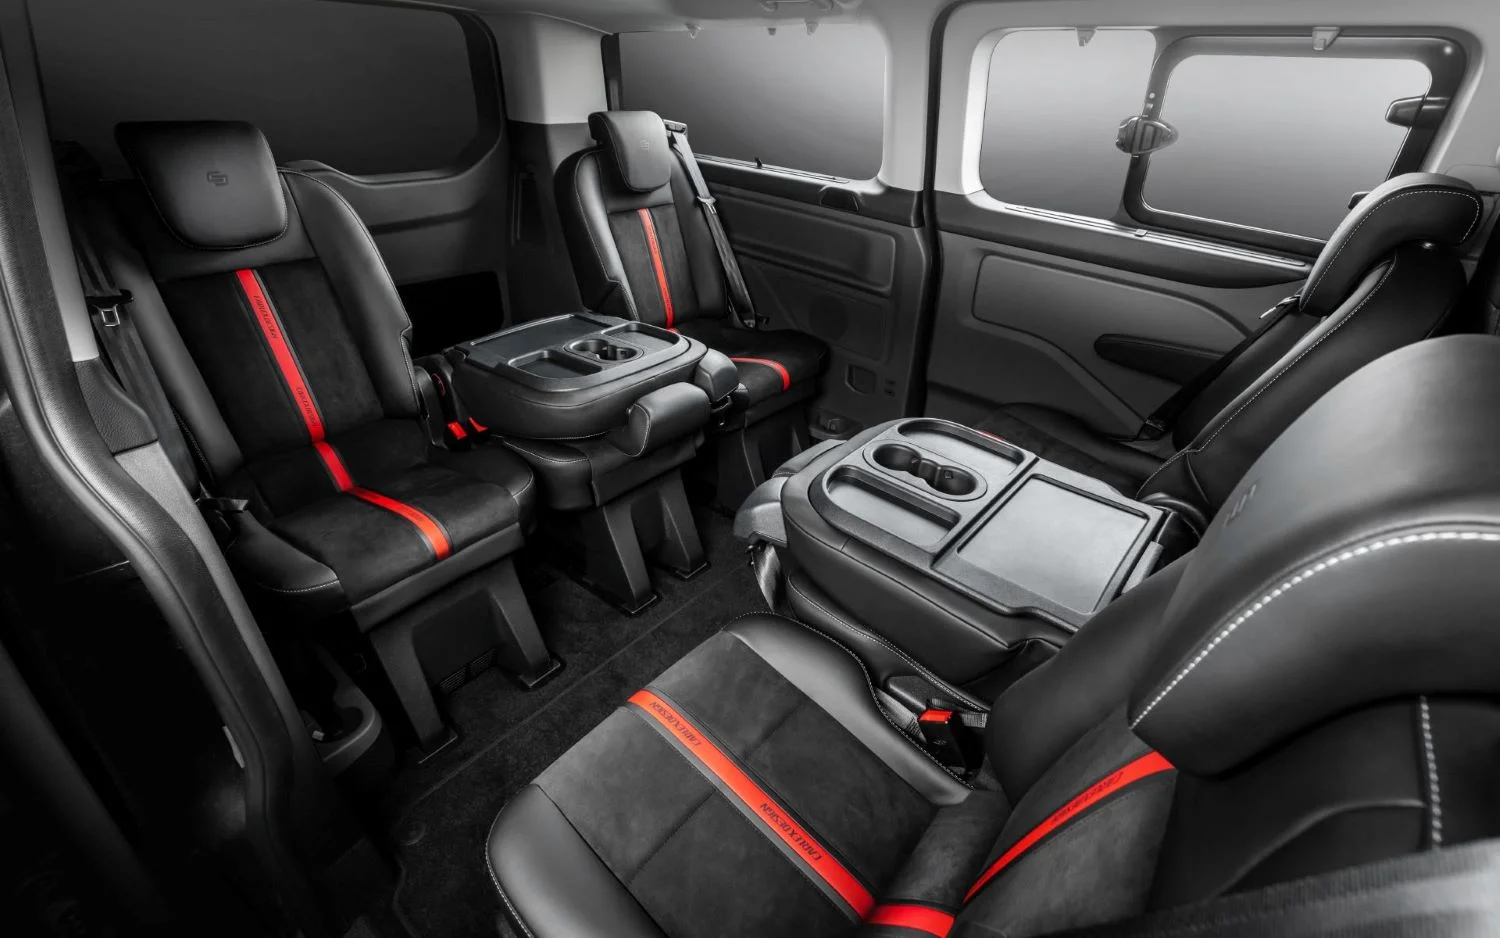 Carlex Design Ford Transit Custom X Final Edition Is One Sweet, Sporty Van - Ford Authority